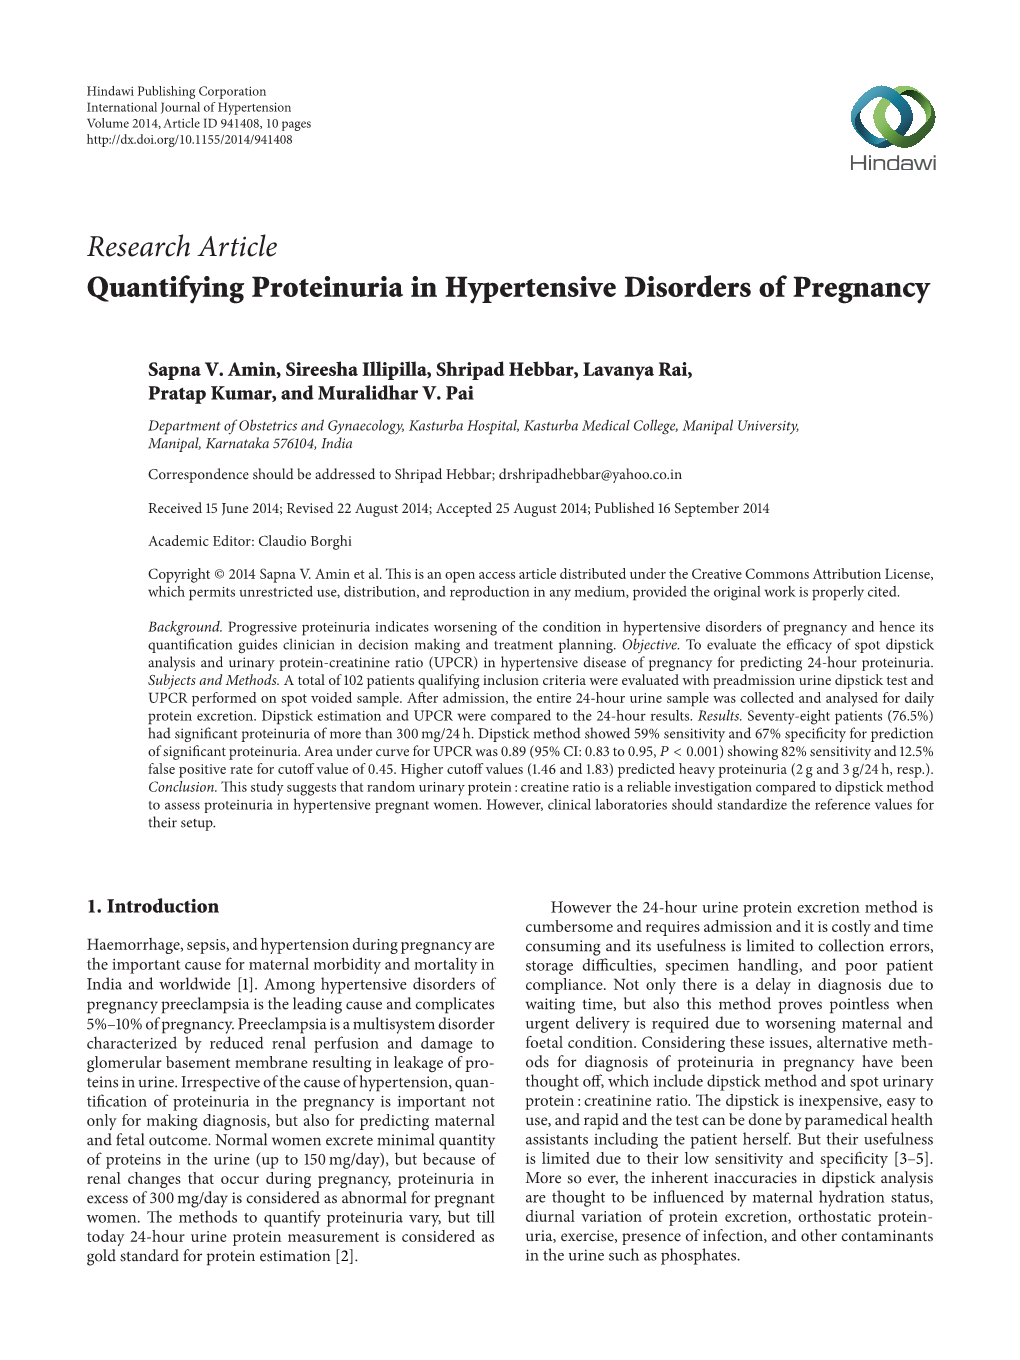 Quantifying Proteinuria in Hypertensive Disorders of Pregnancy